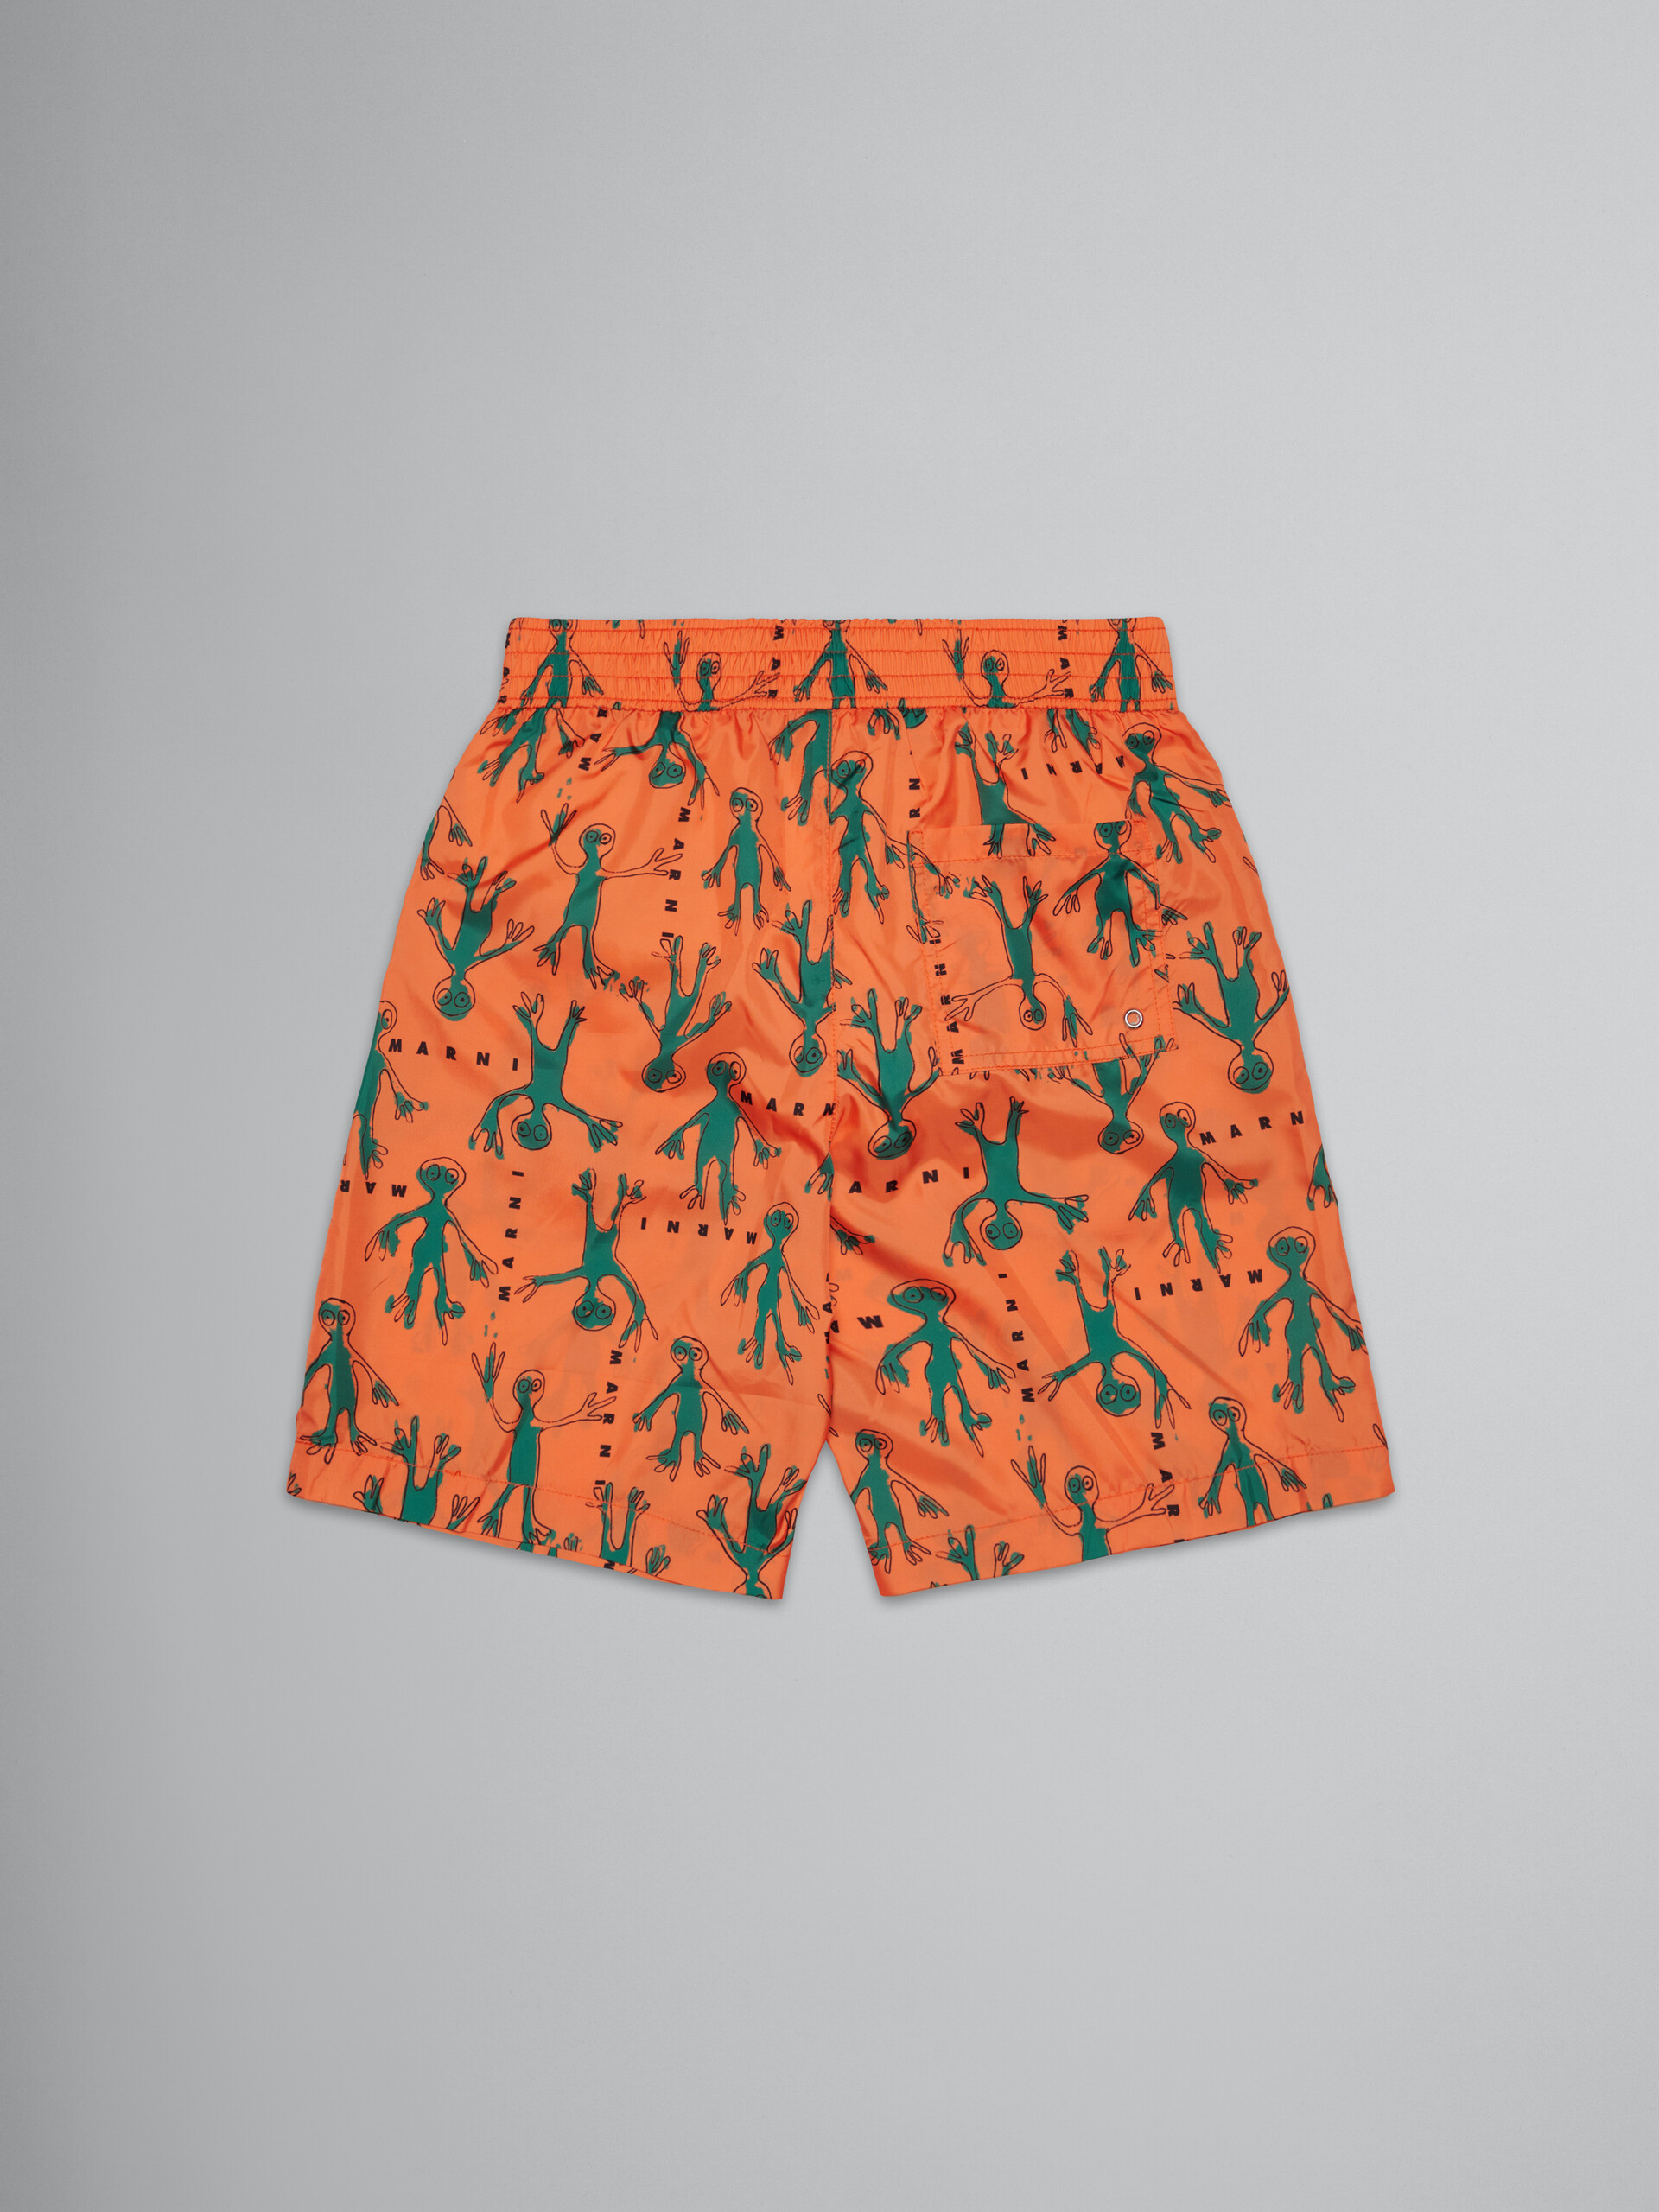 Orange boxer swimsuit with allover Frog print - kids - Image 2